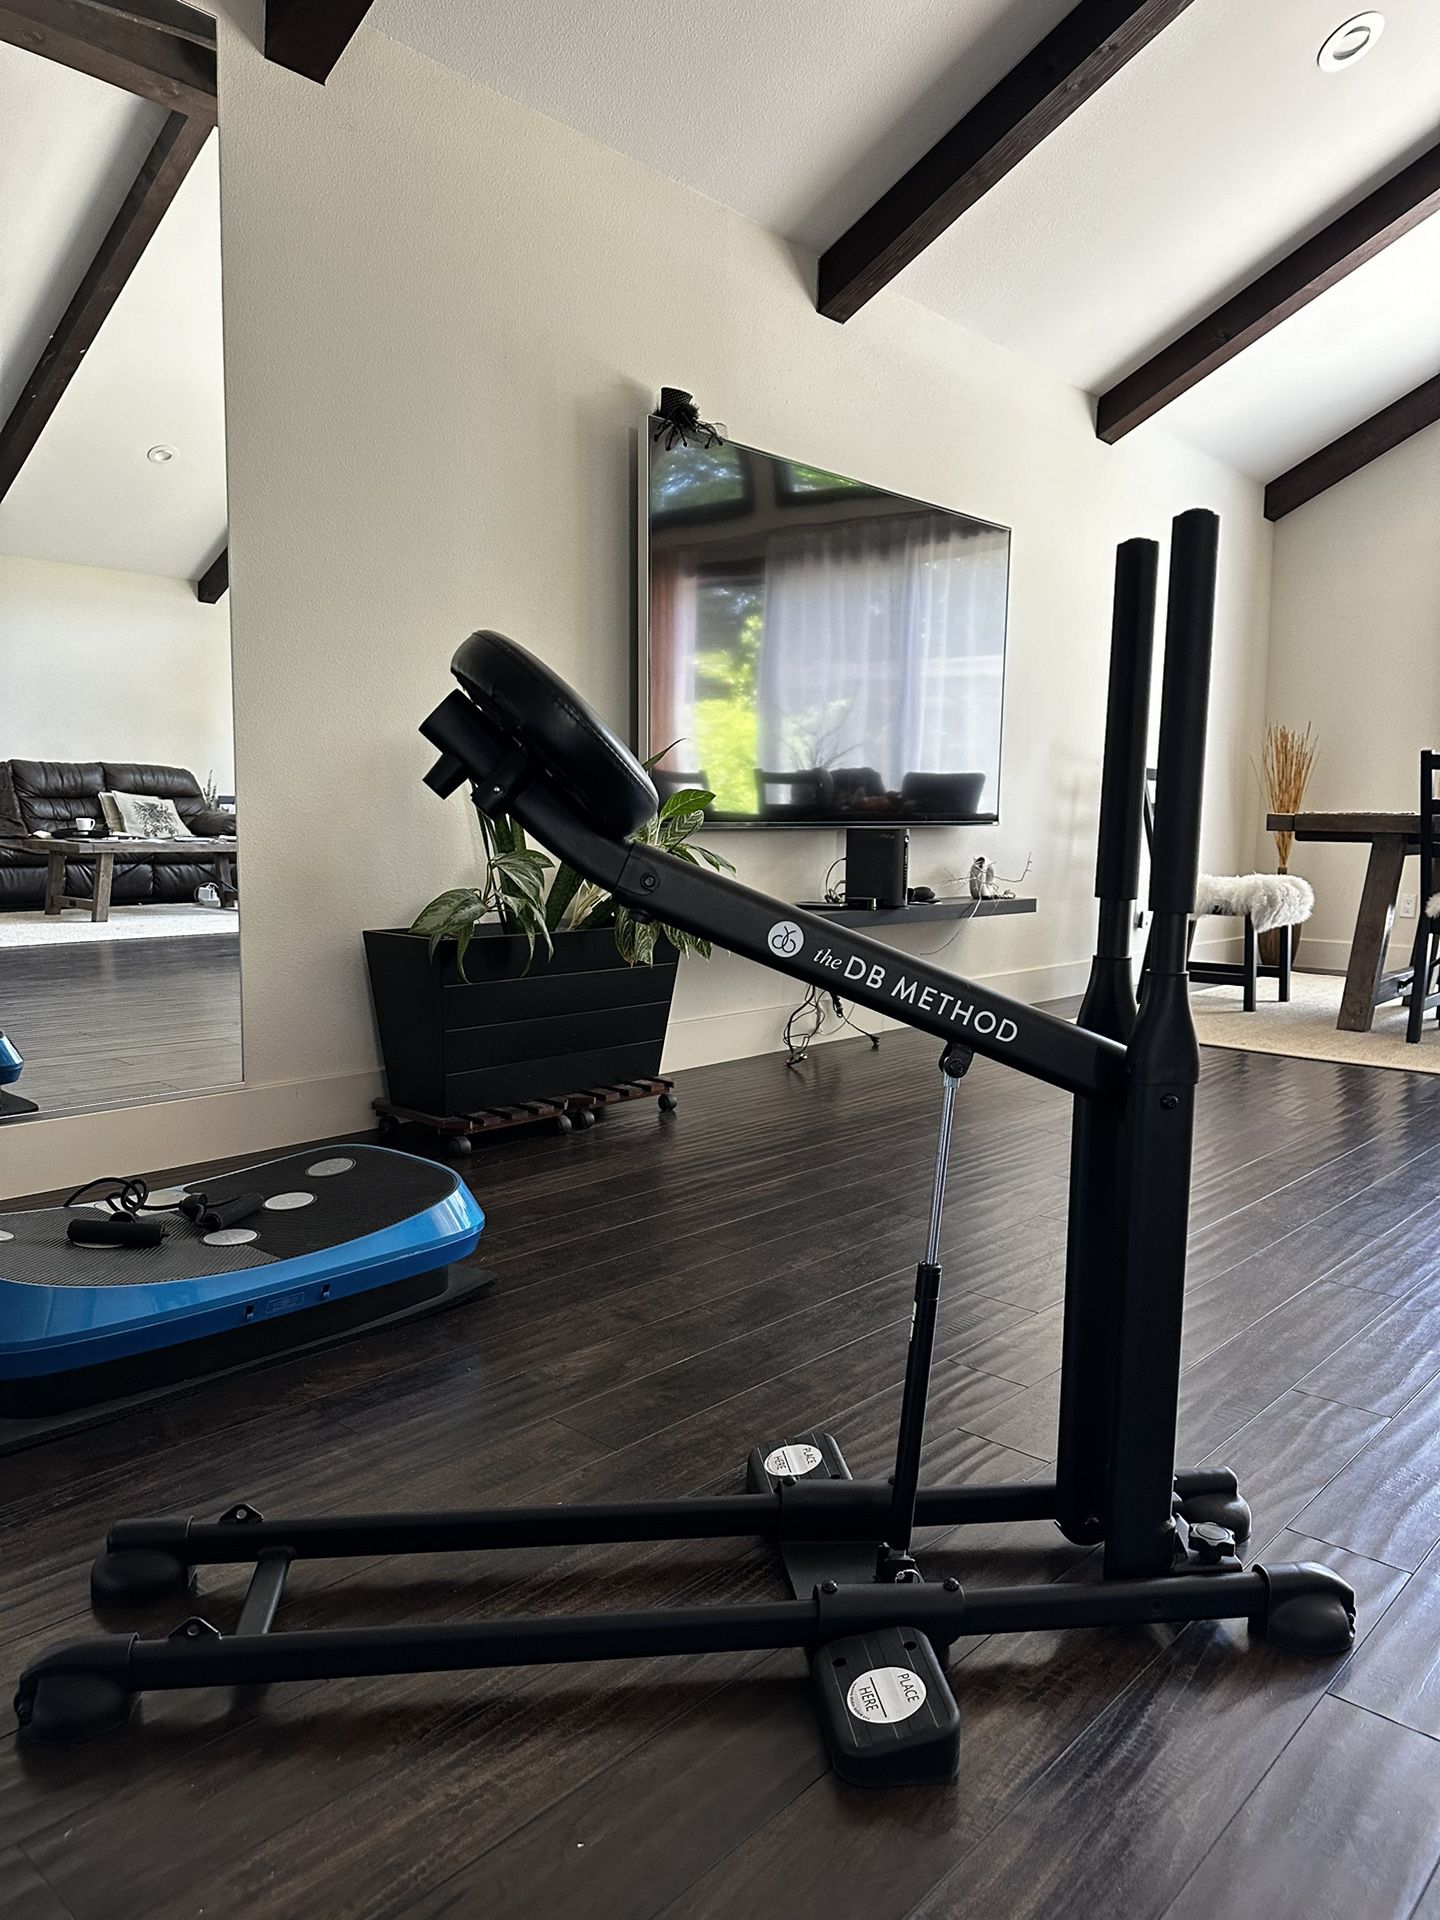 The DB Method Squat Perfected Machine Workout Equipment For Home Gym, Exercise Leg & Glutes 